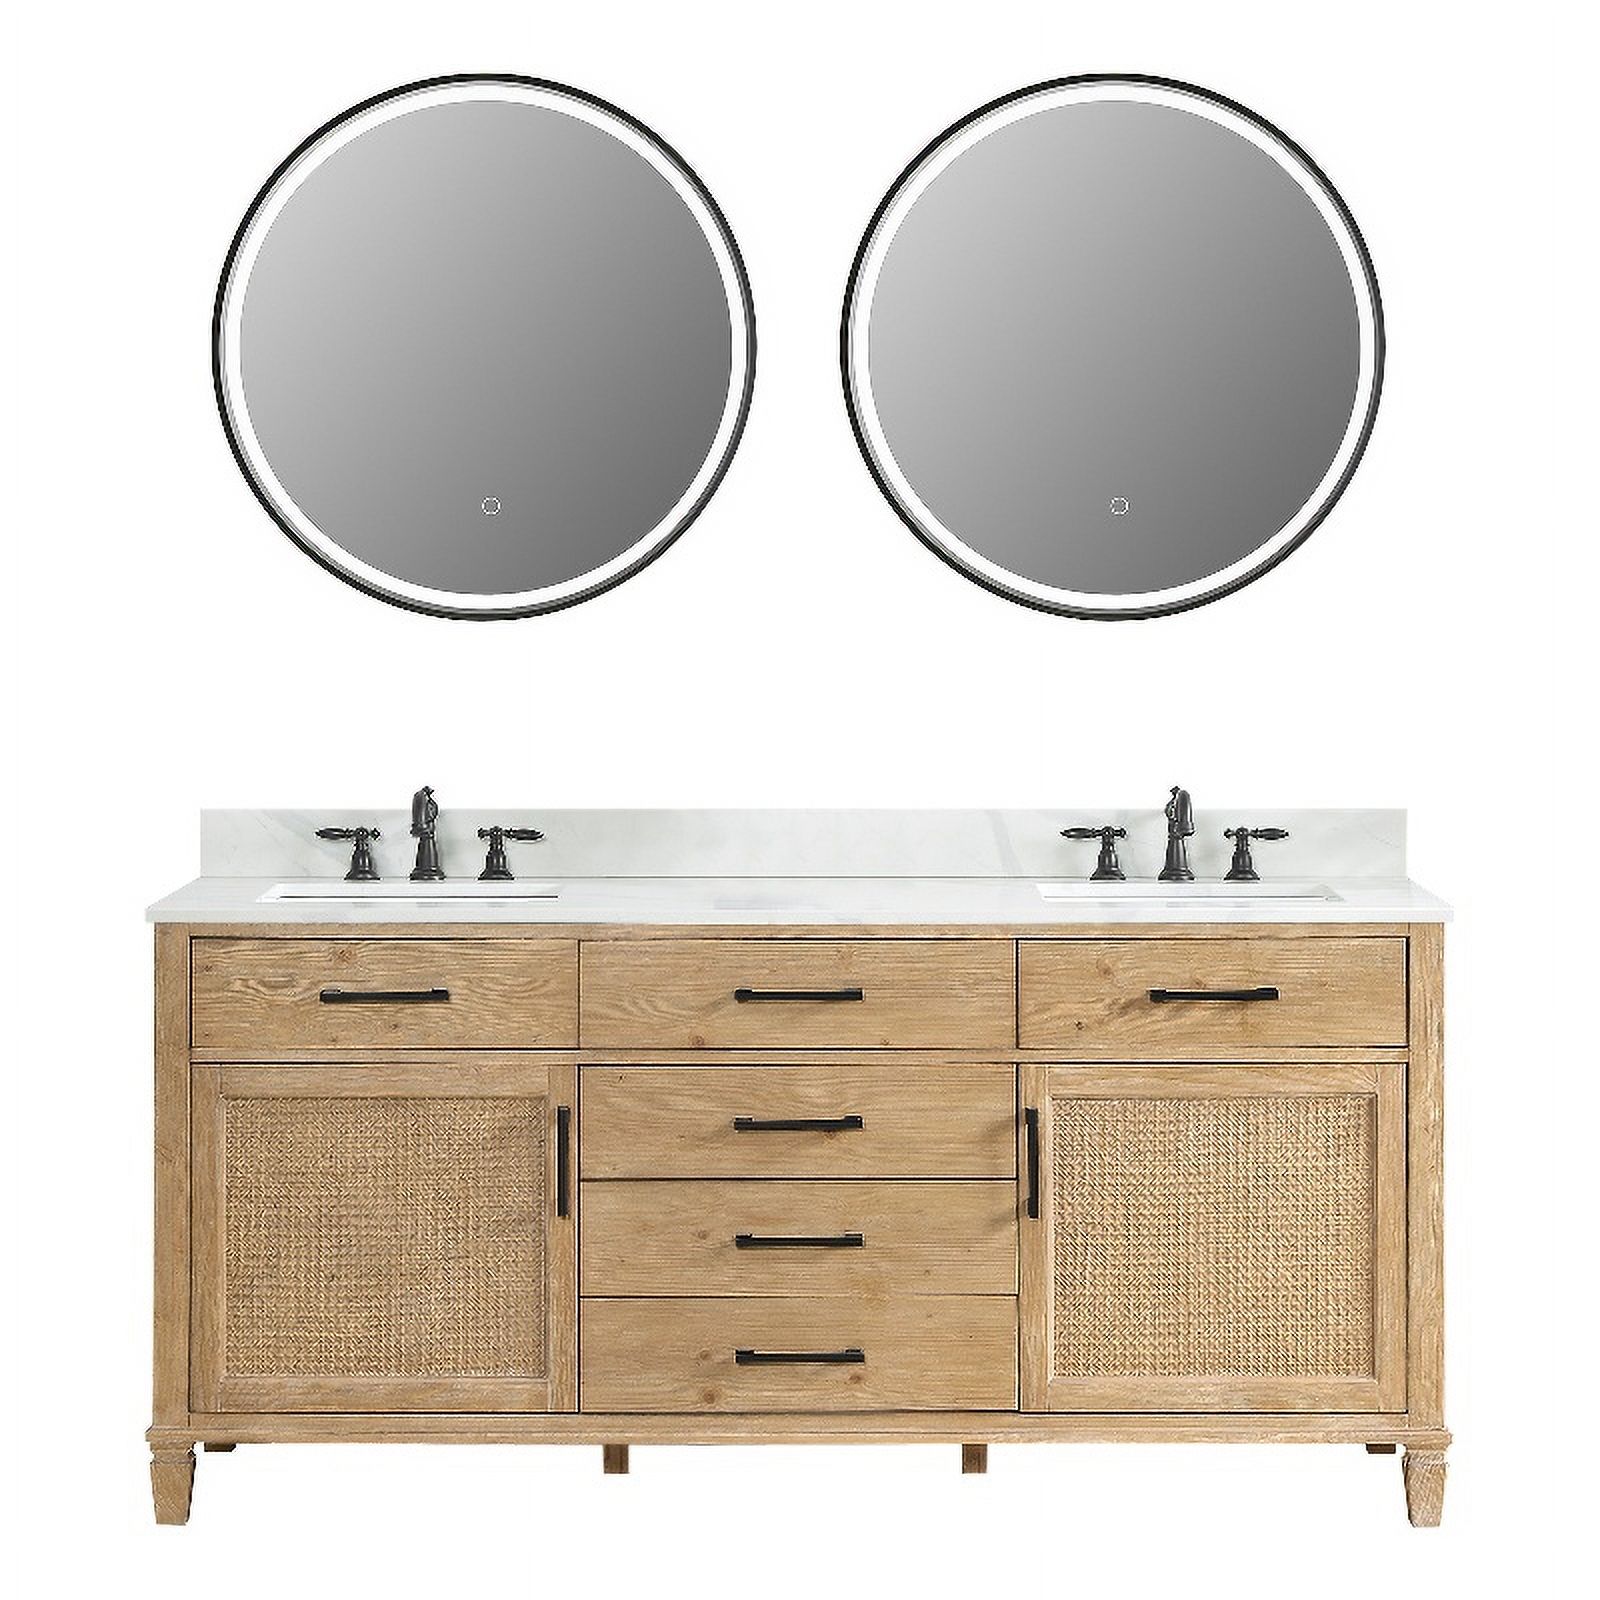 Issac Edwards Collection 72" Double Bathroom Vanity in Weathered Fir with Calacatta White Quartz Stone Countertop with Mirror Option